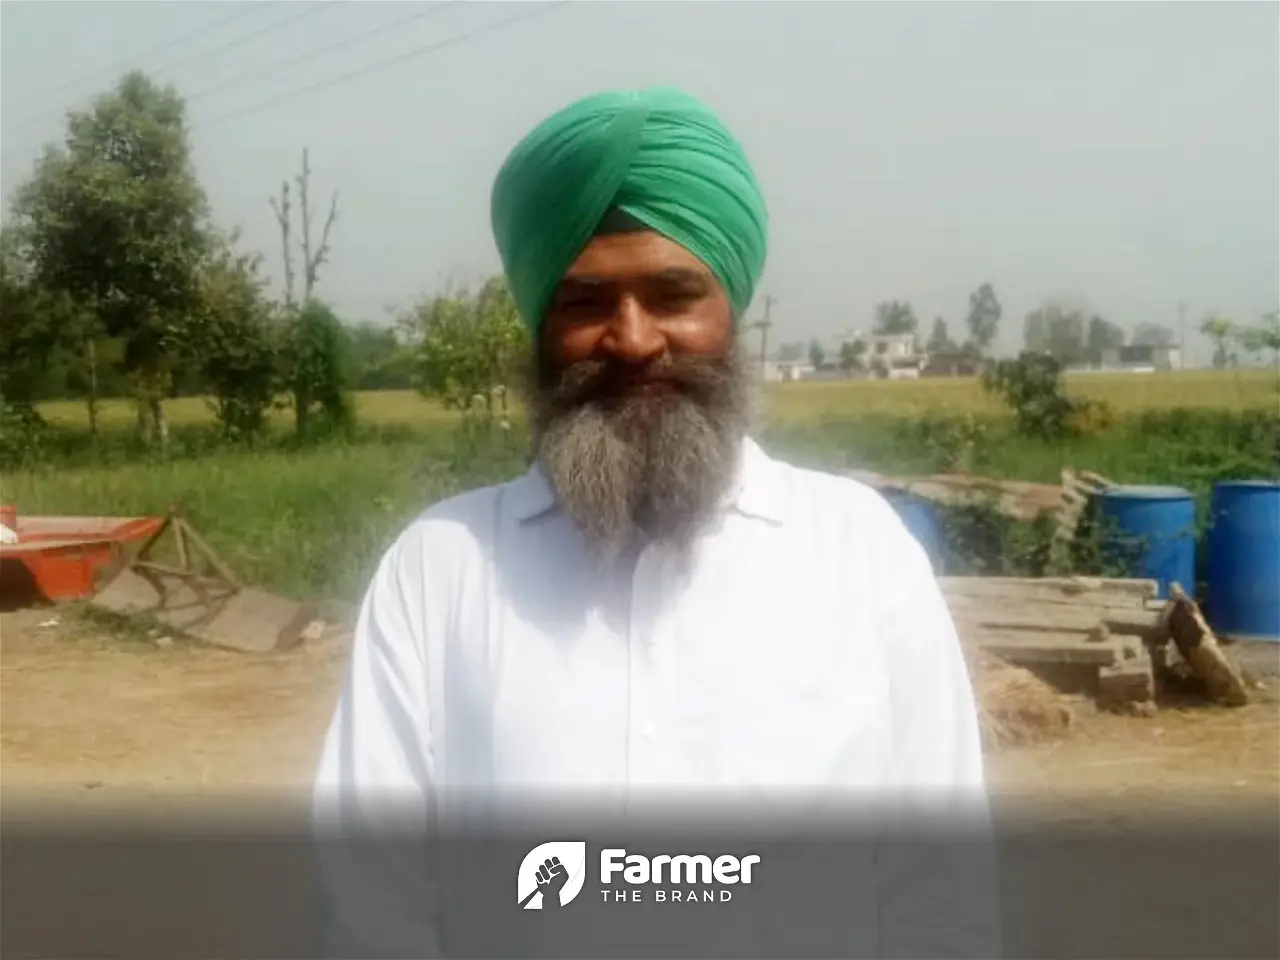 Start small, invest little and work hard to succeed in farming says a progressive farmer from Samrala